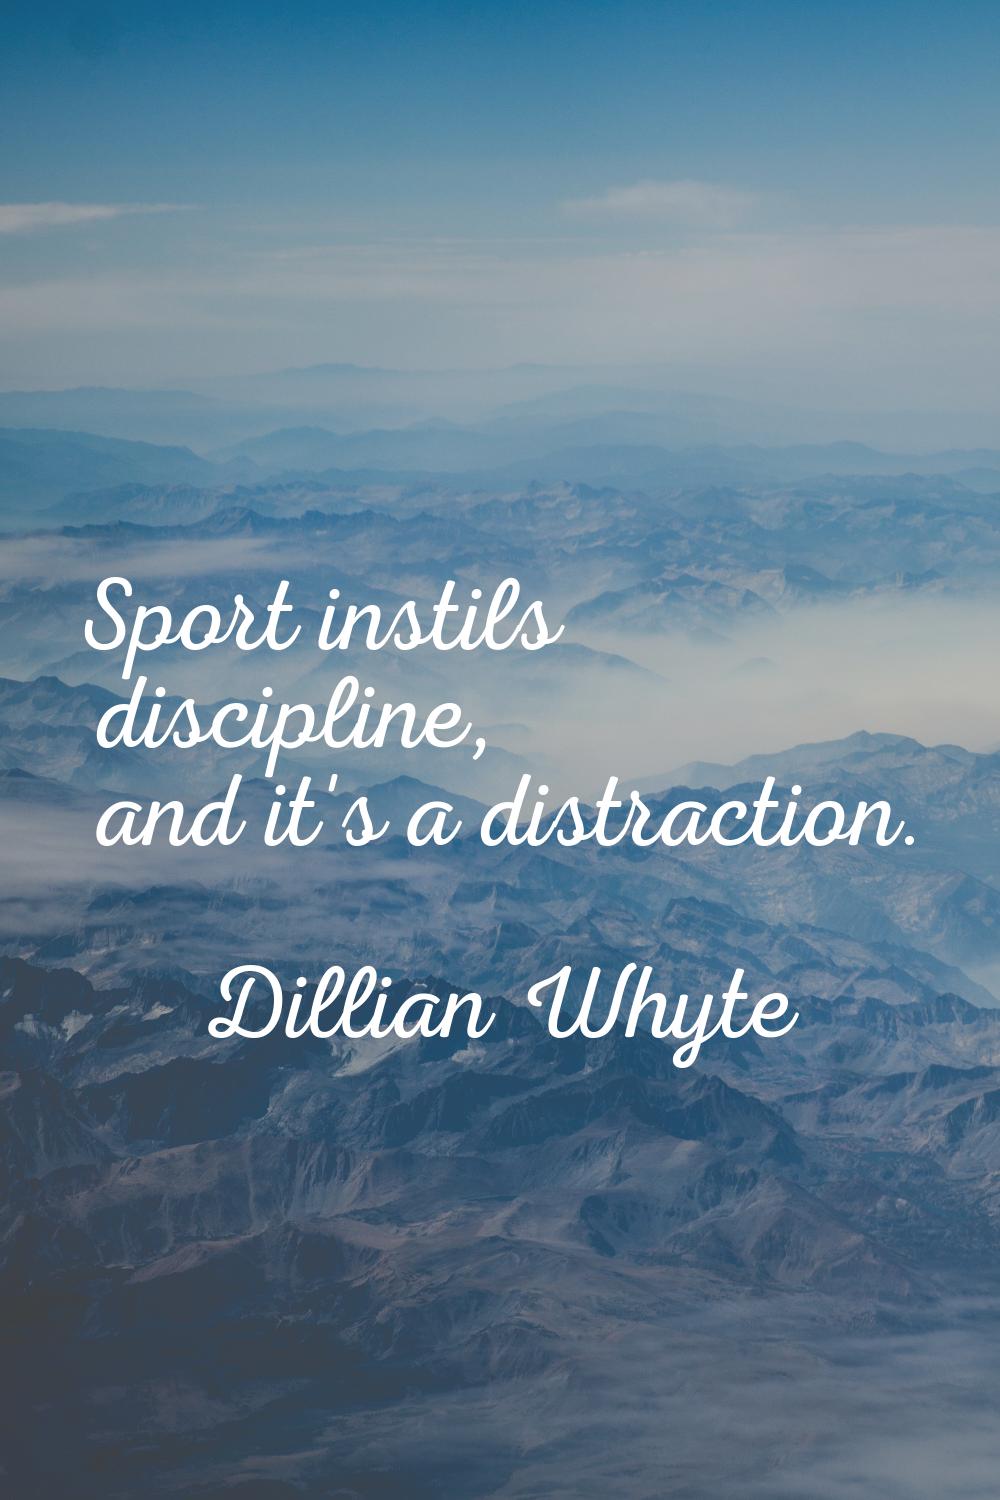 Sport instils discipline, and it's a distraction.